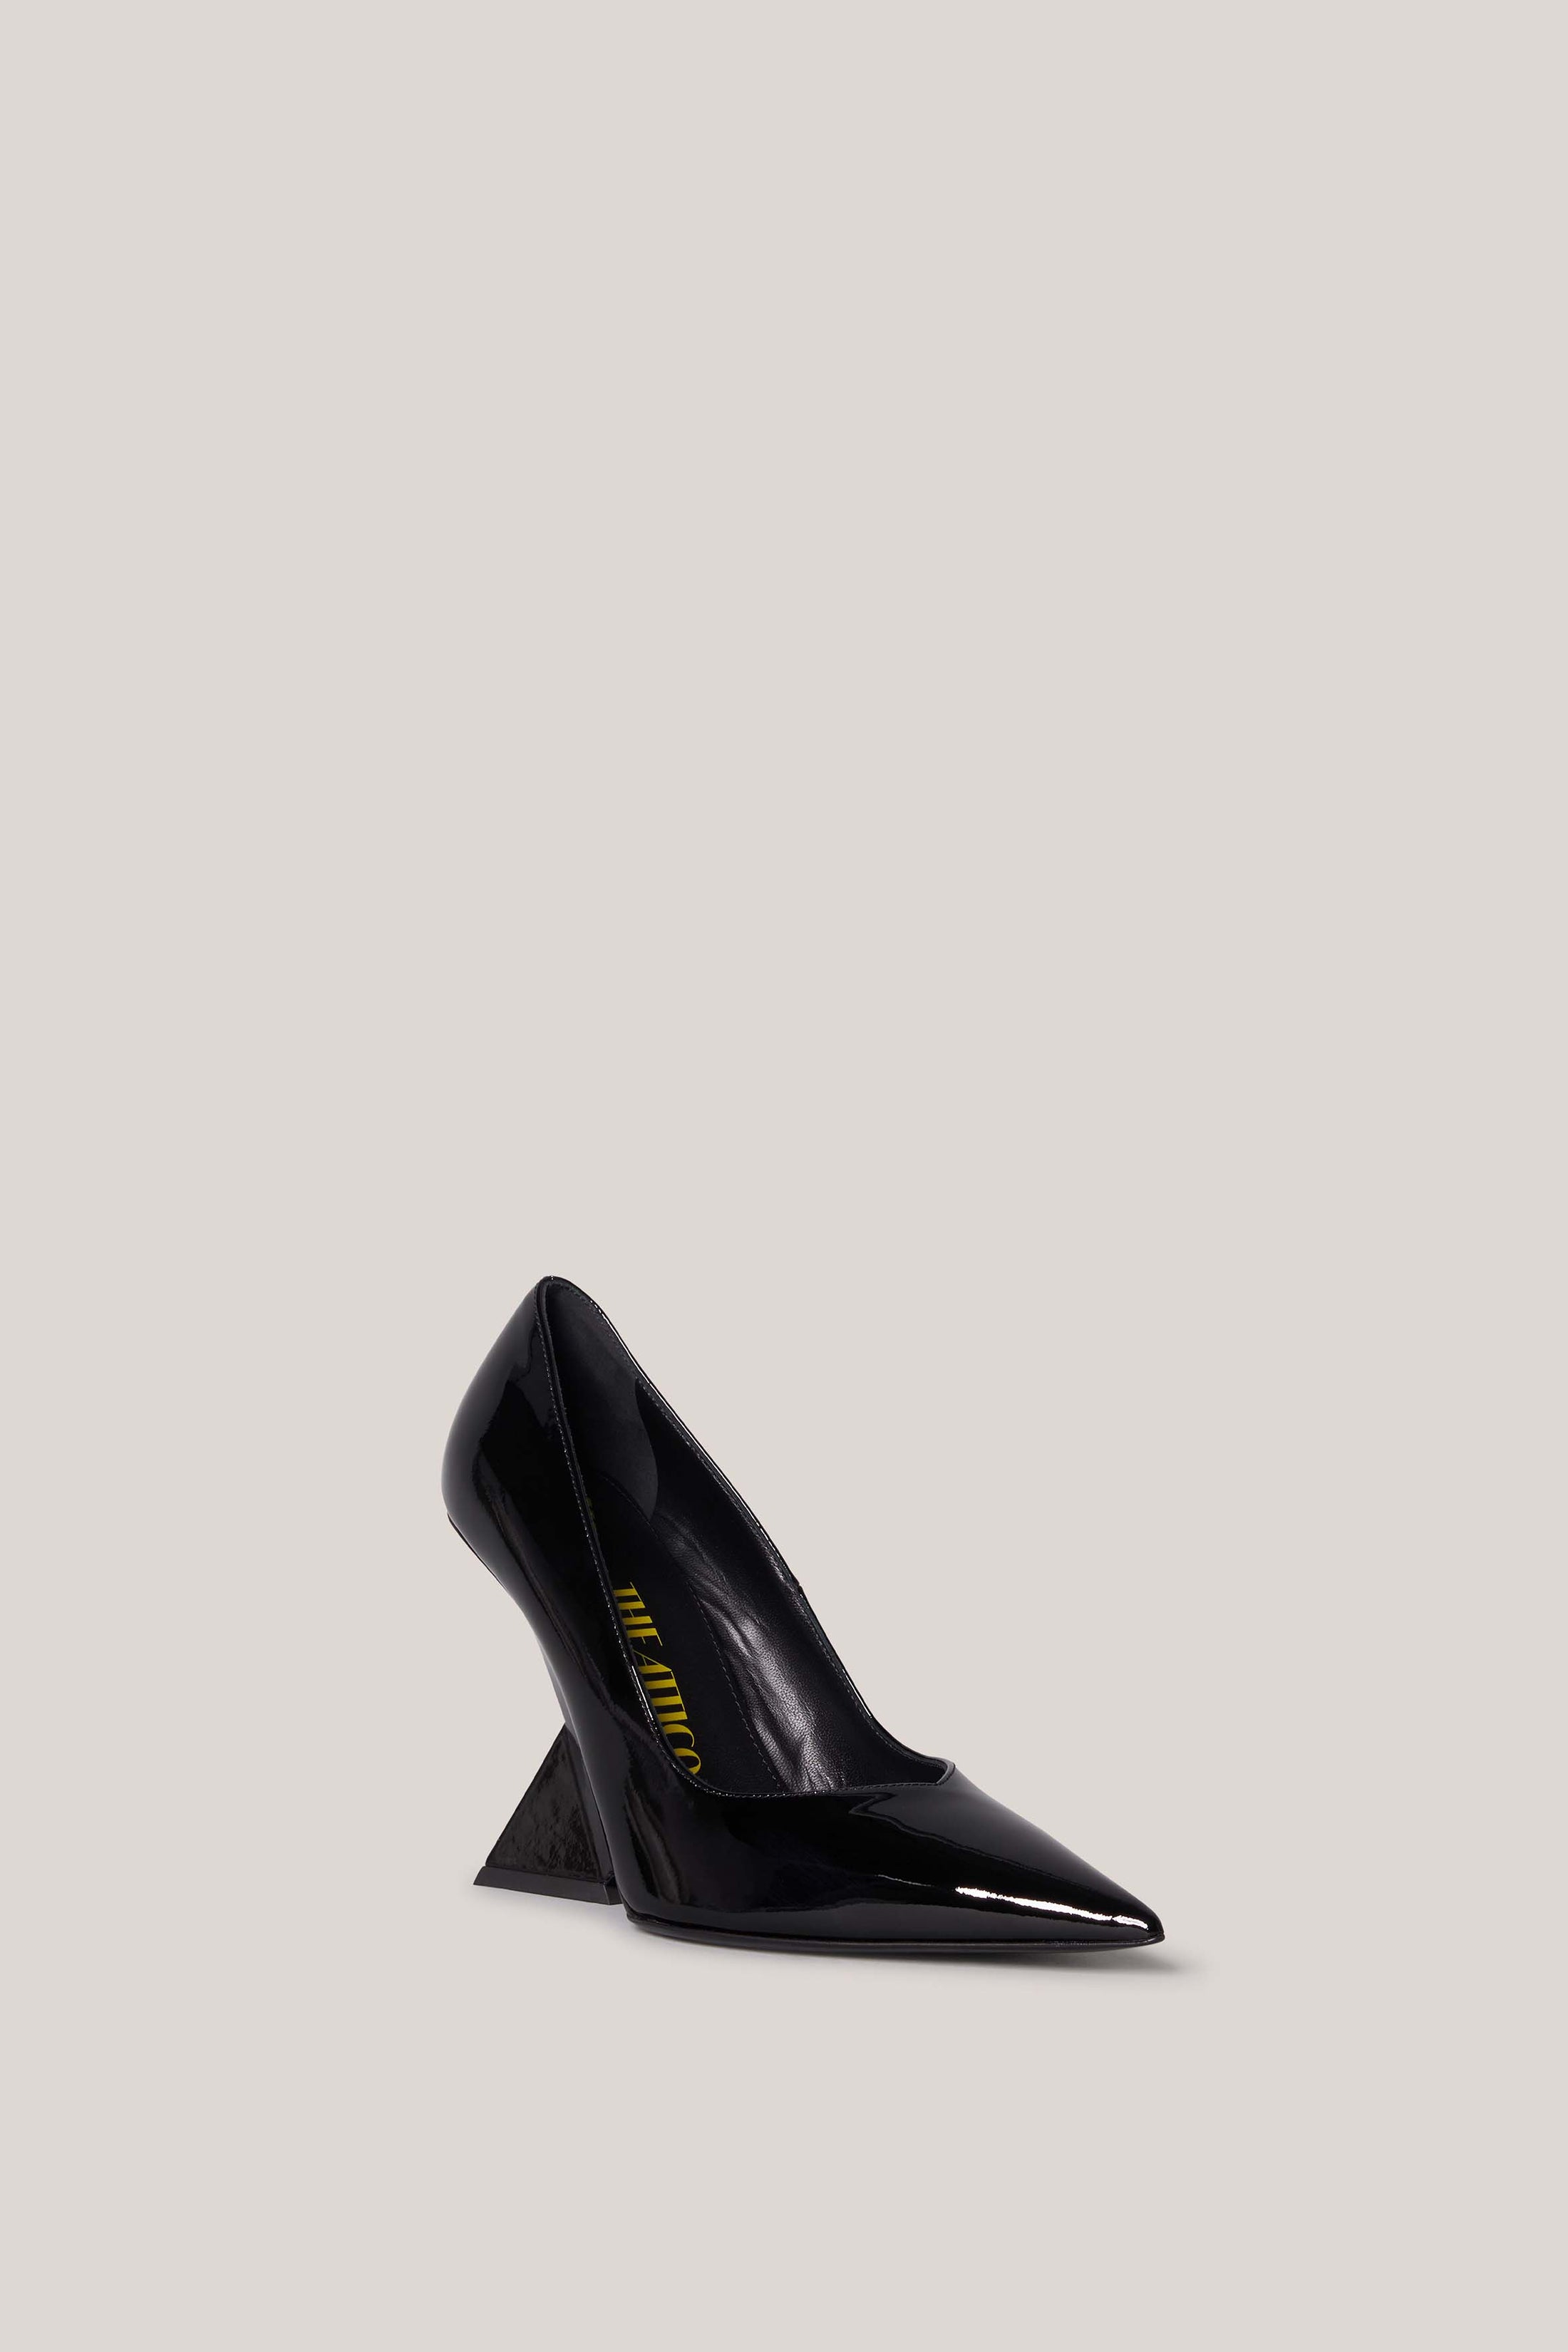 Cheope'' black pump for Women